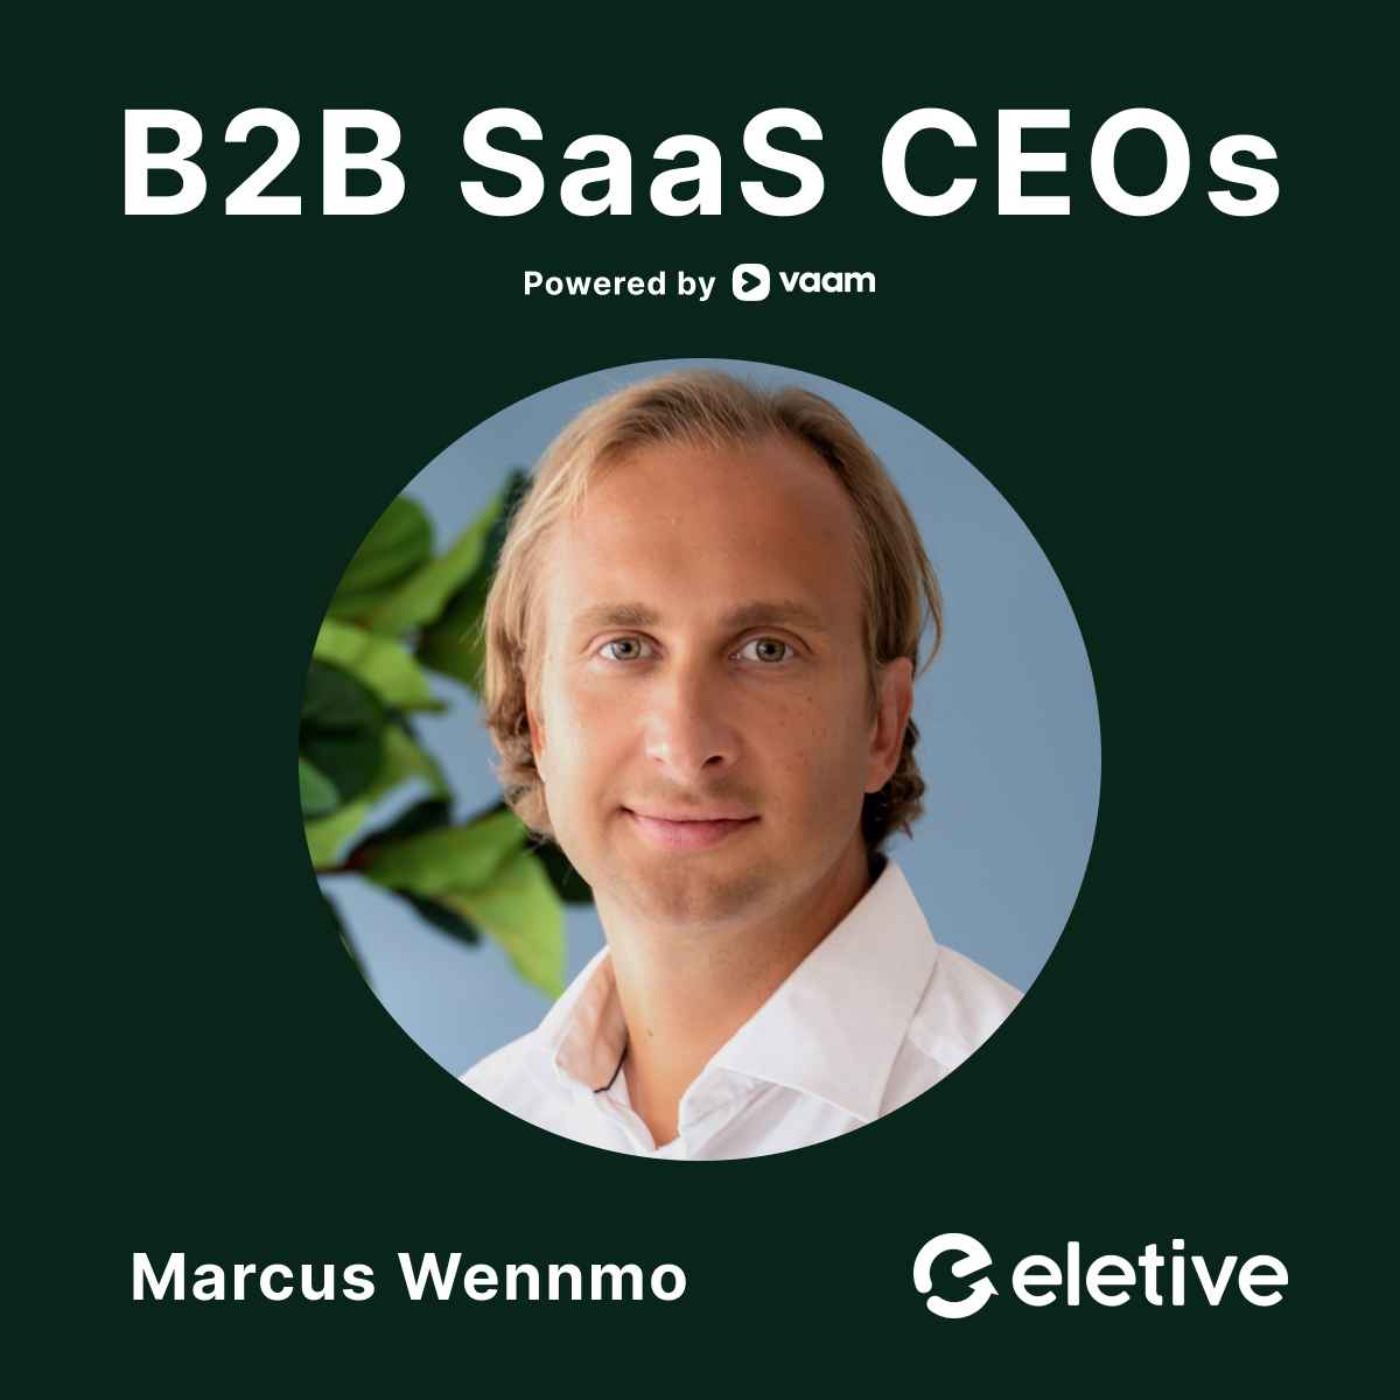 67. Build a workplace where people thrive - Marcus Wennmo (Eletive)